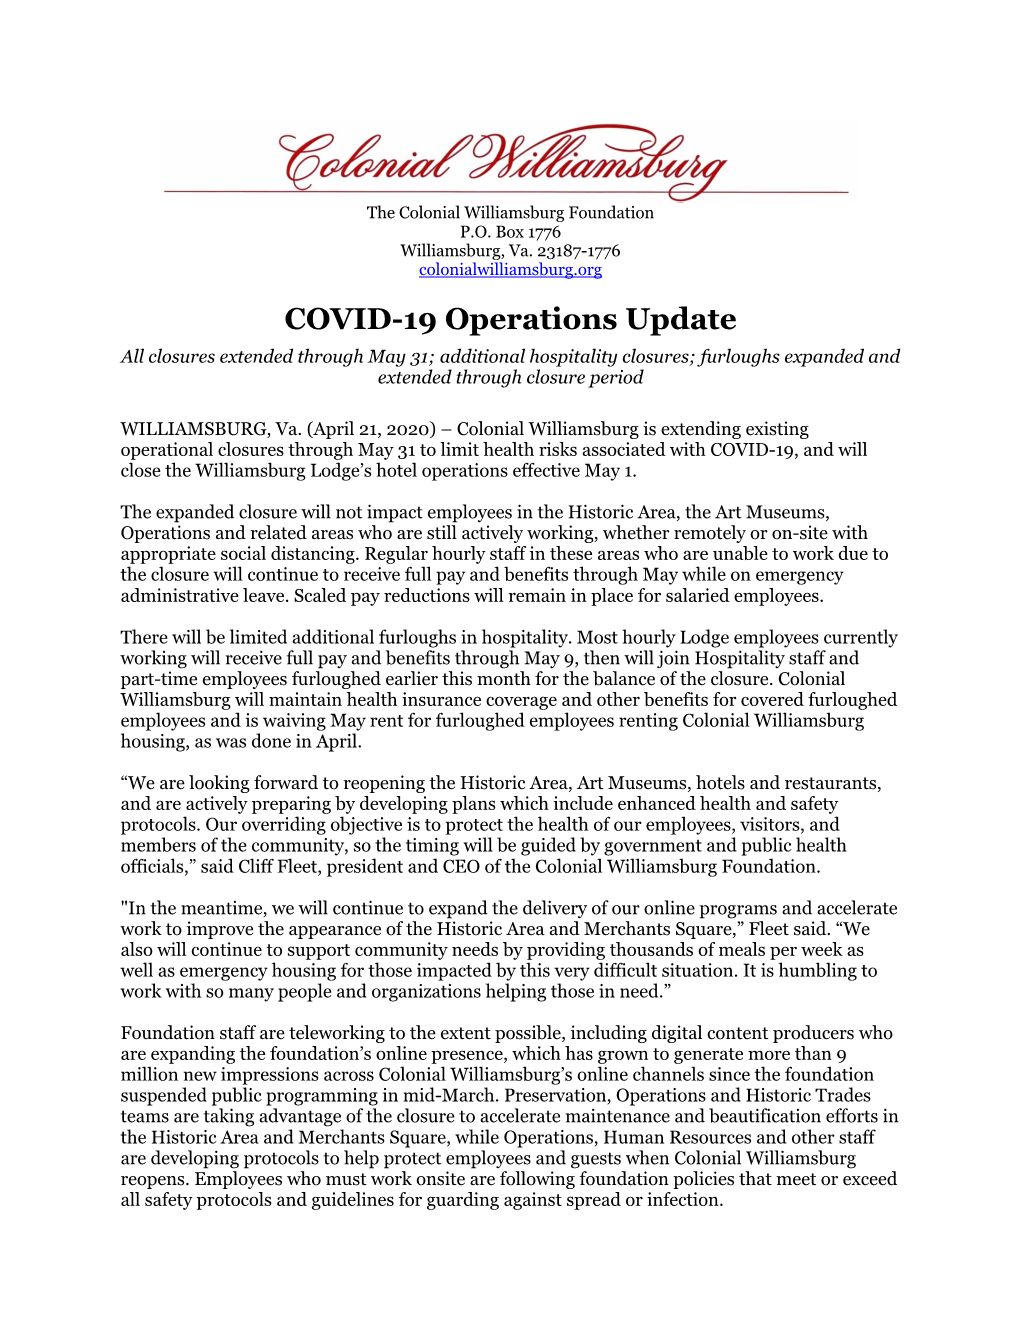 COVID-19 Operations Update All Closures Extended Through May 31; Additional Hospitality Closures; Furloughs Expanded and Extended Through Closure Period